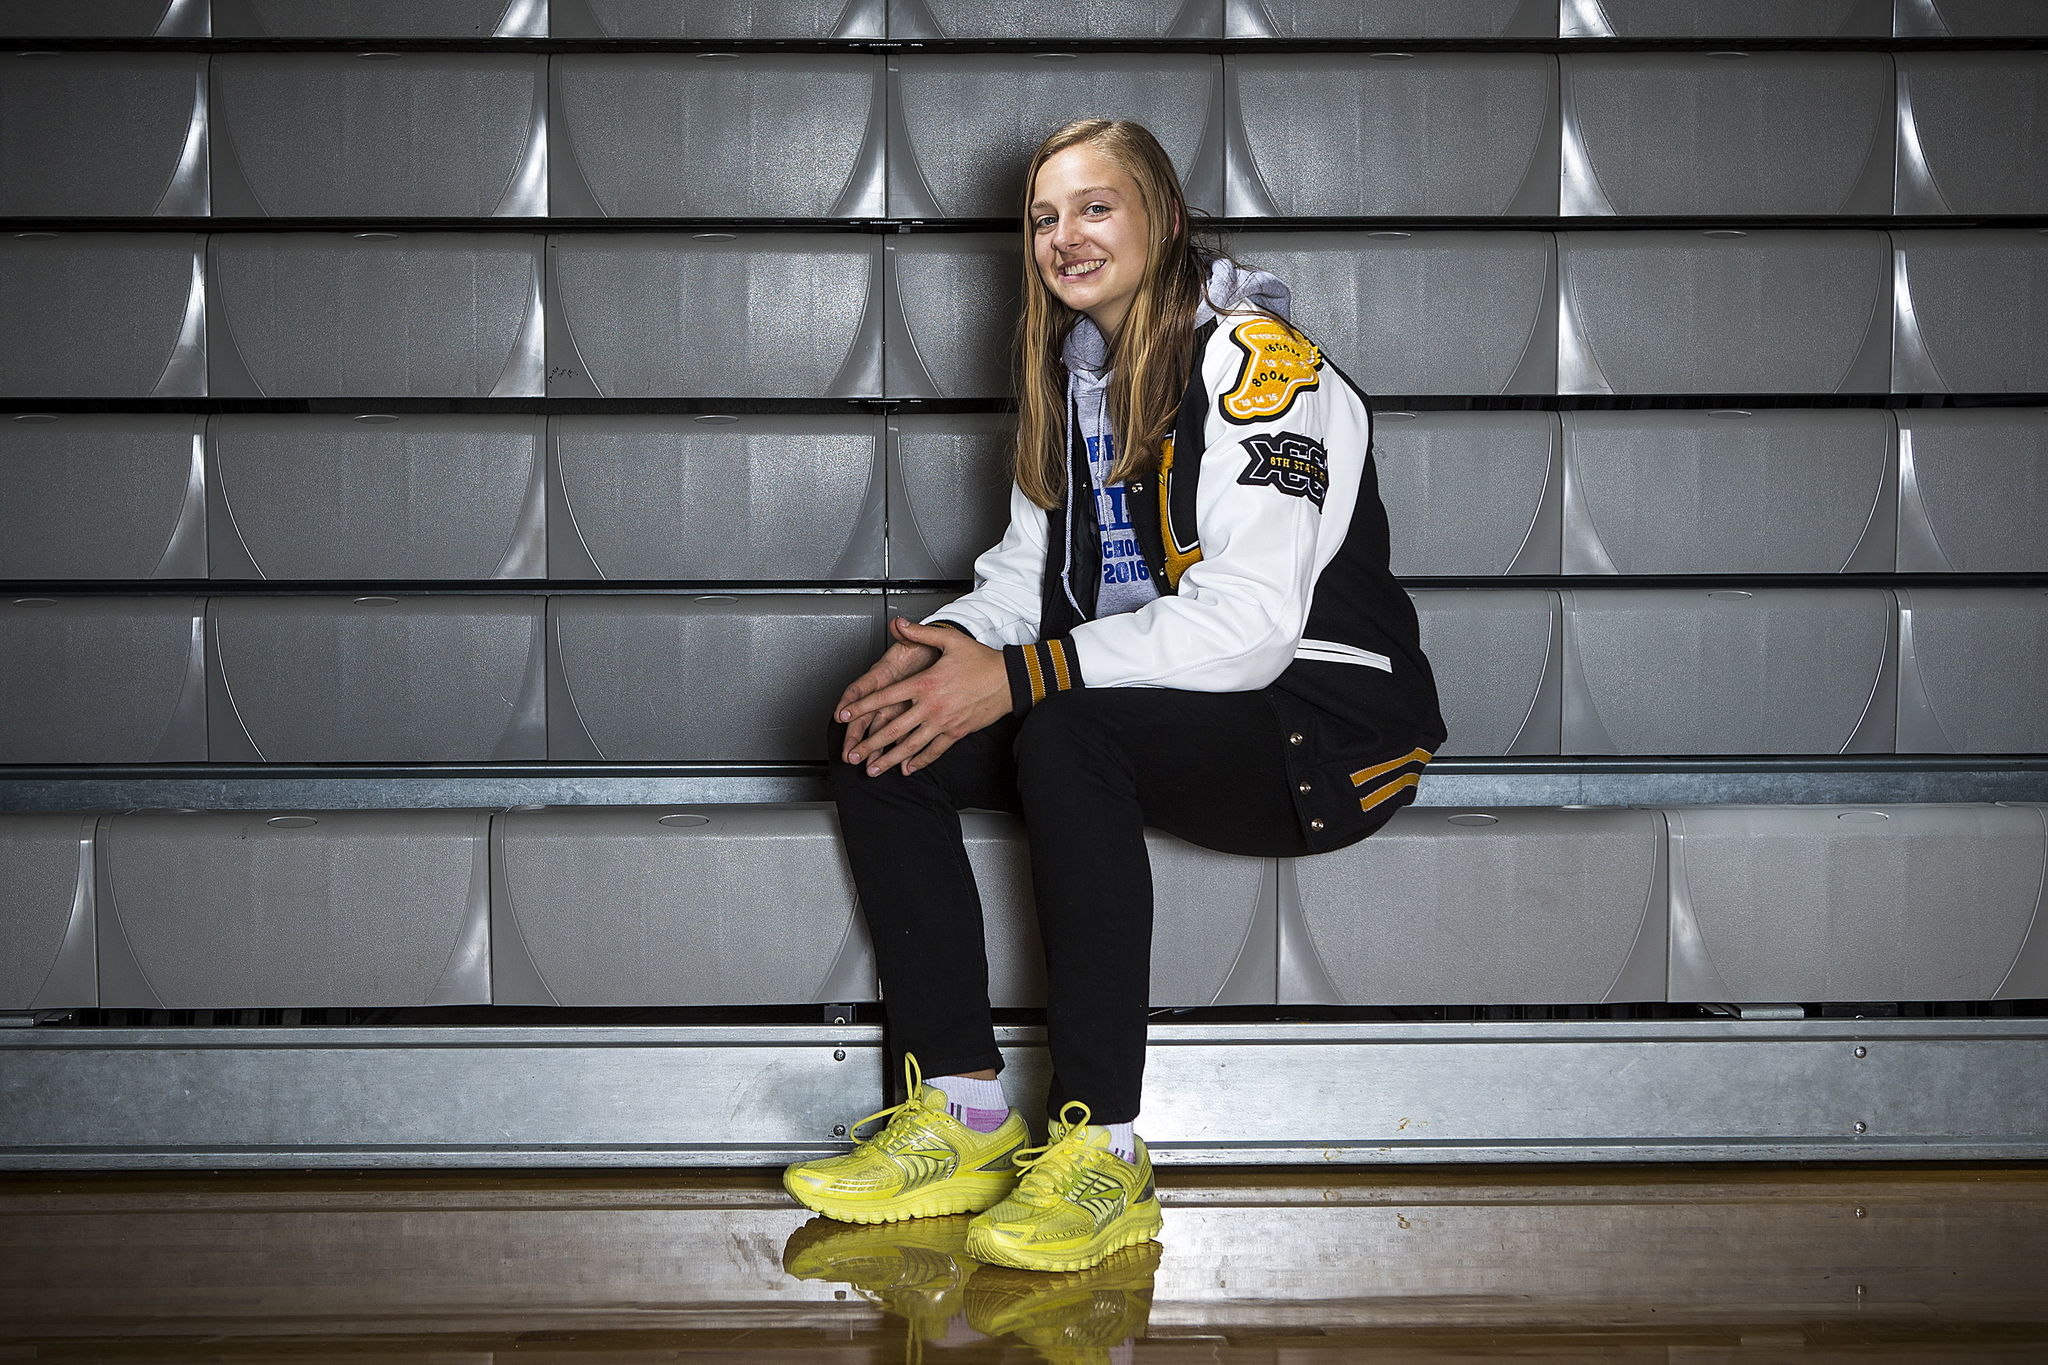 Lynnwood’s Mikayla Pivec, who will play basketball at Oregon State next season, is The Herald’s Kristi Bartz Memorial 2016 Girls High School Athlete of the Year.